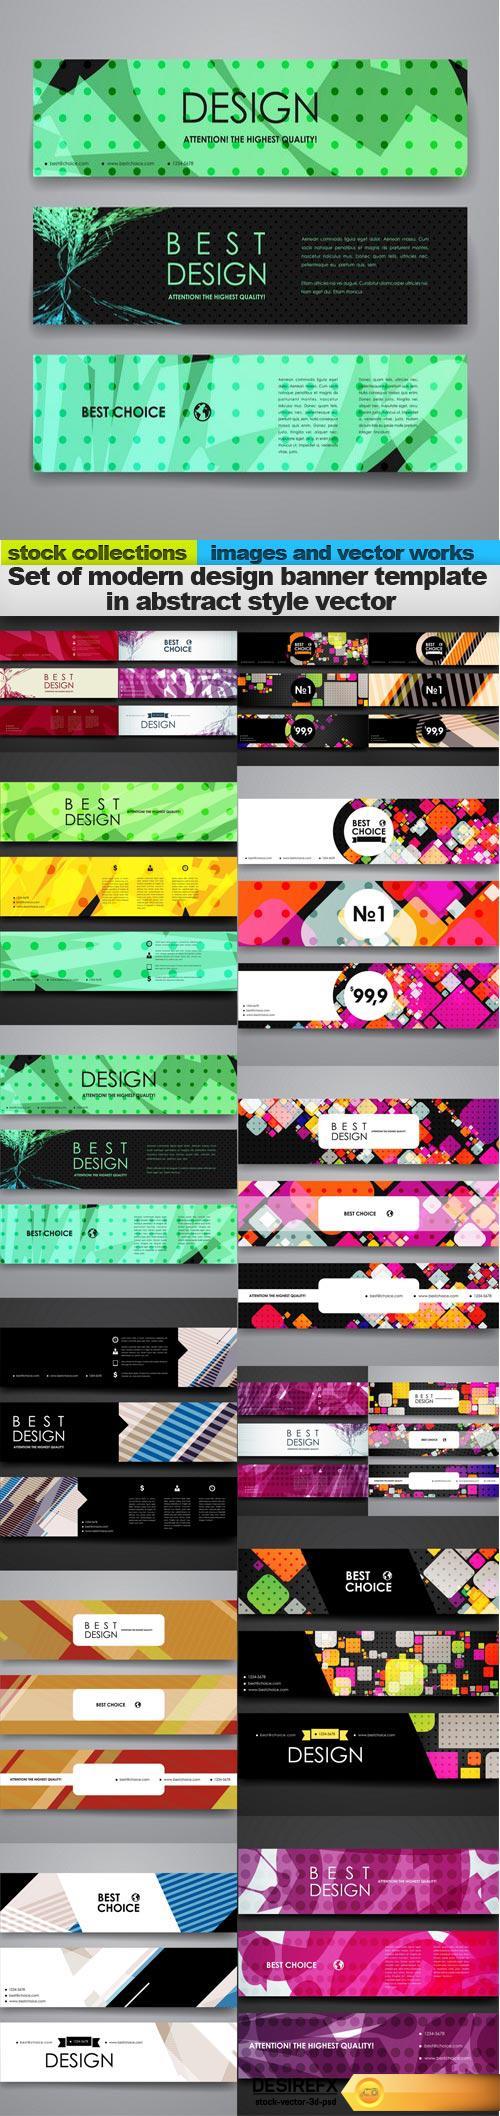 Set of modern design banner template in abstract style vector, 15 x EPS